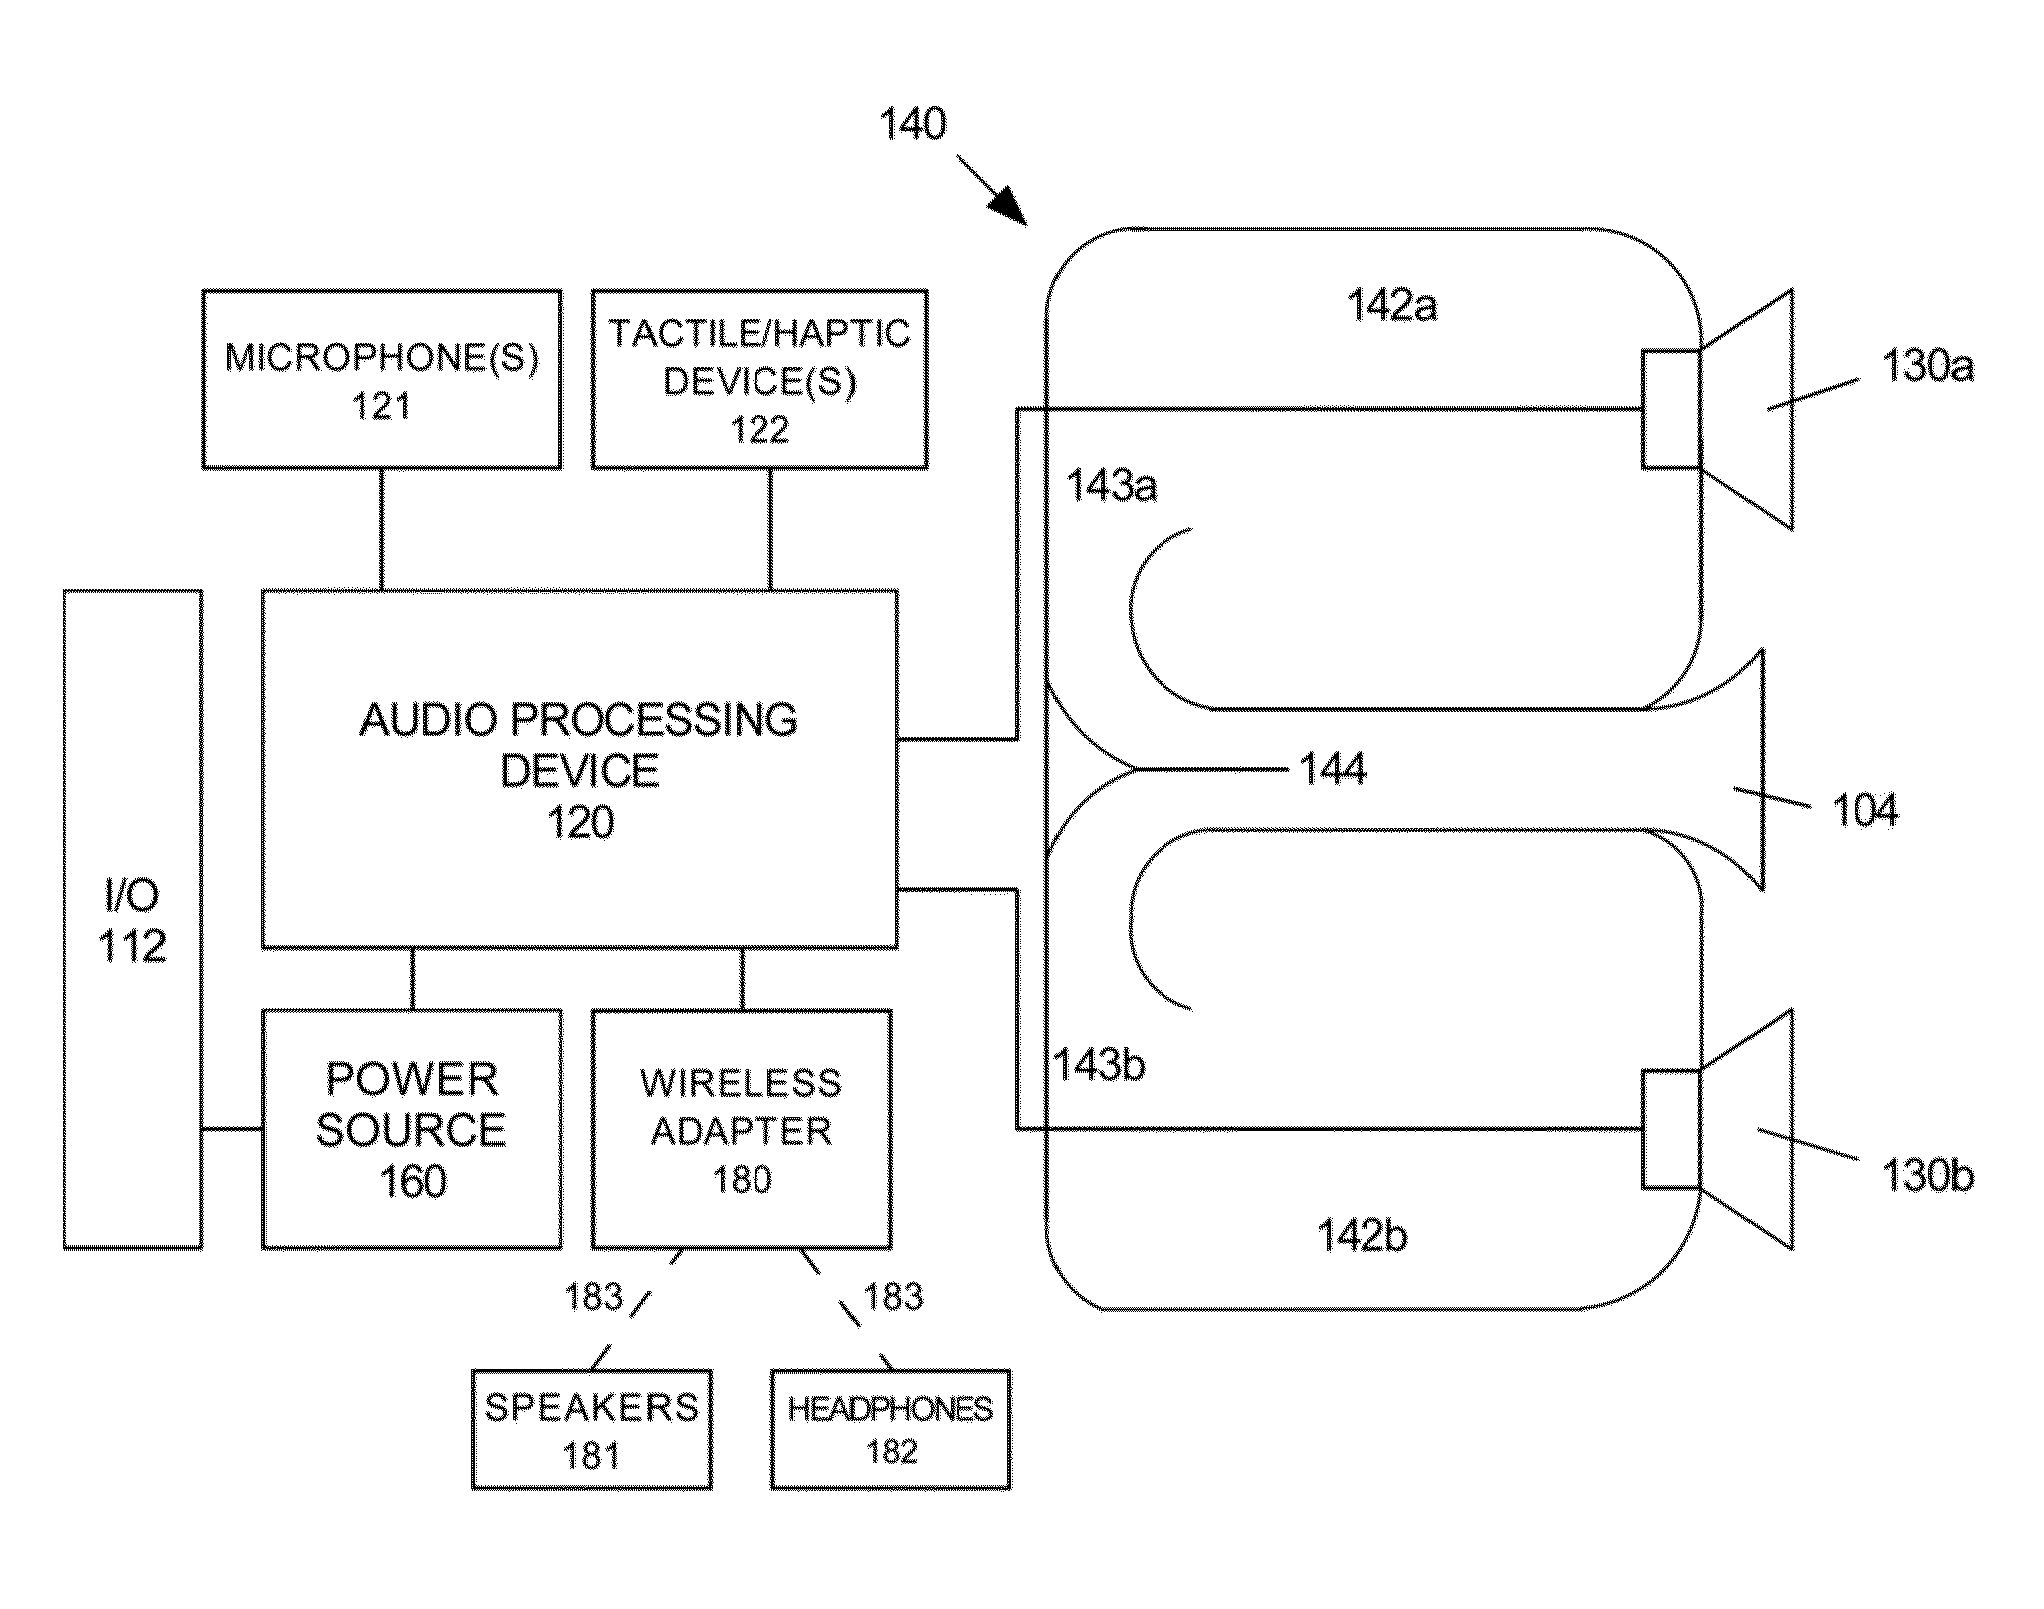 Acoustic layer in media device providing enhanced audio performance